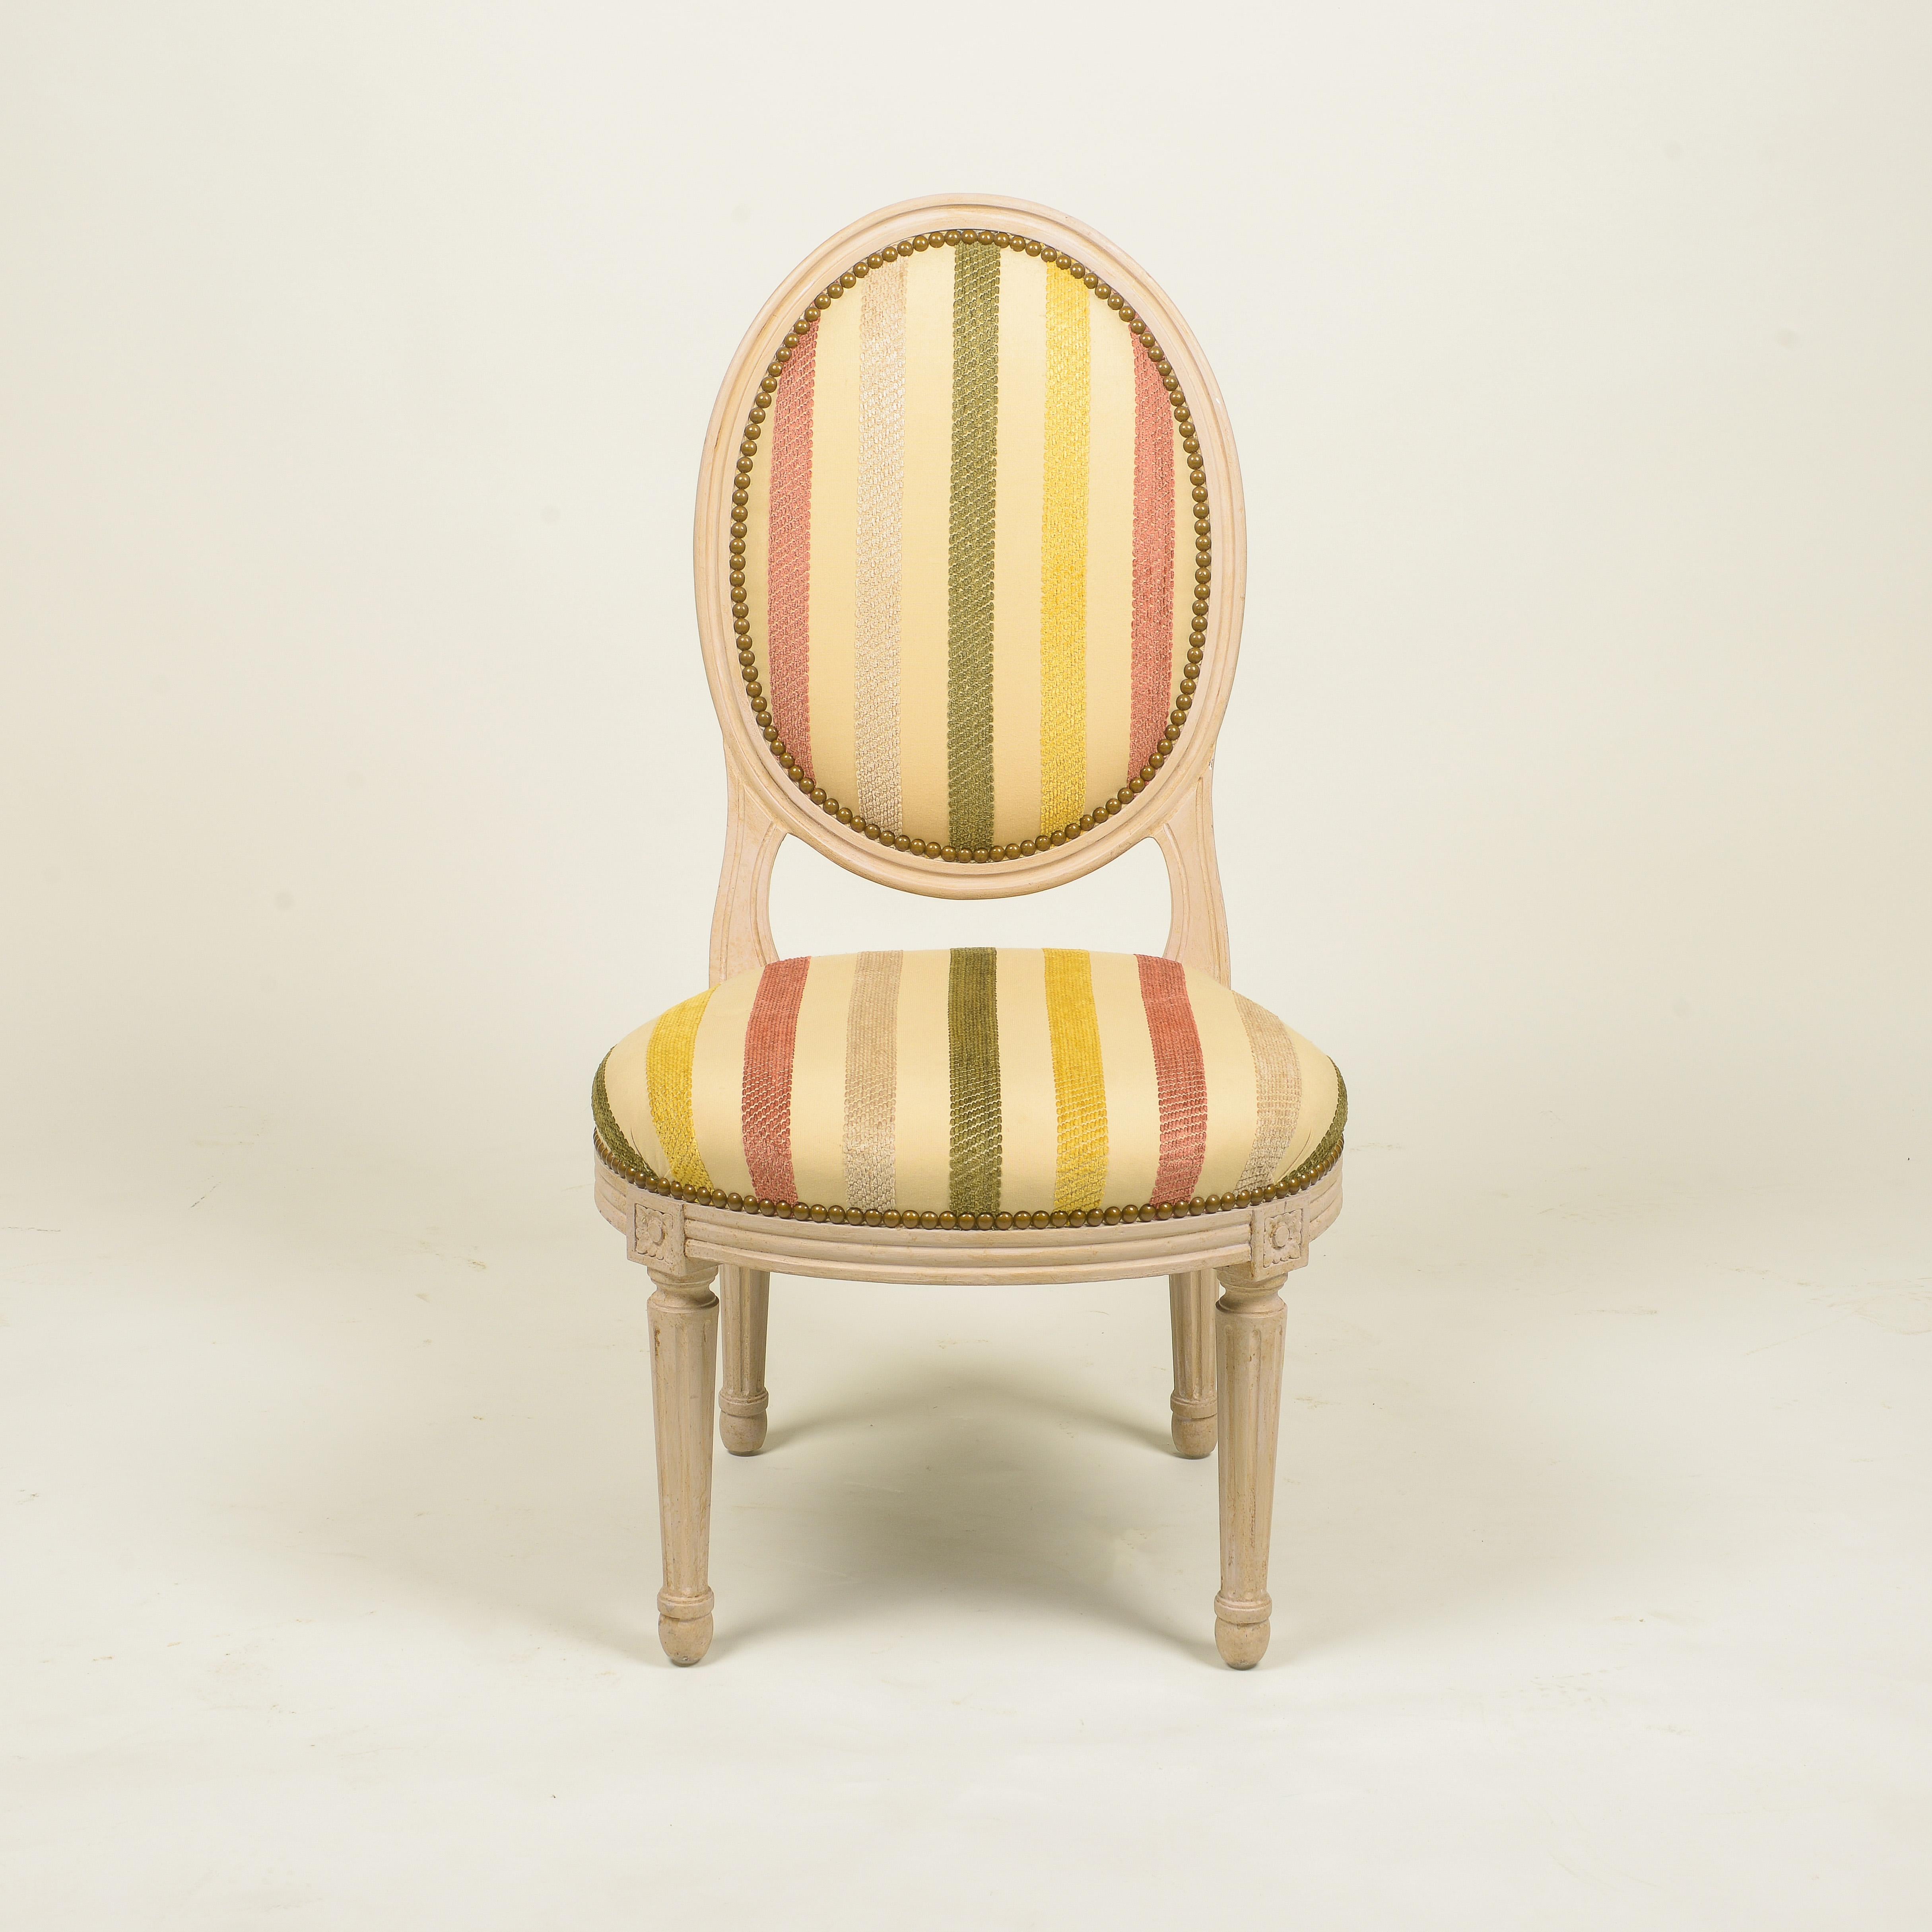 The padded oval back and seat within a fluted frame; raised on stop-fluted tapering legs headed by flowerheads; upholstered in a tapestry polychrome stripe with nailheads.